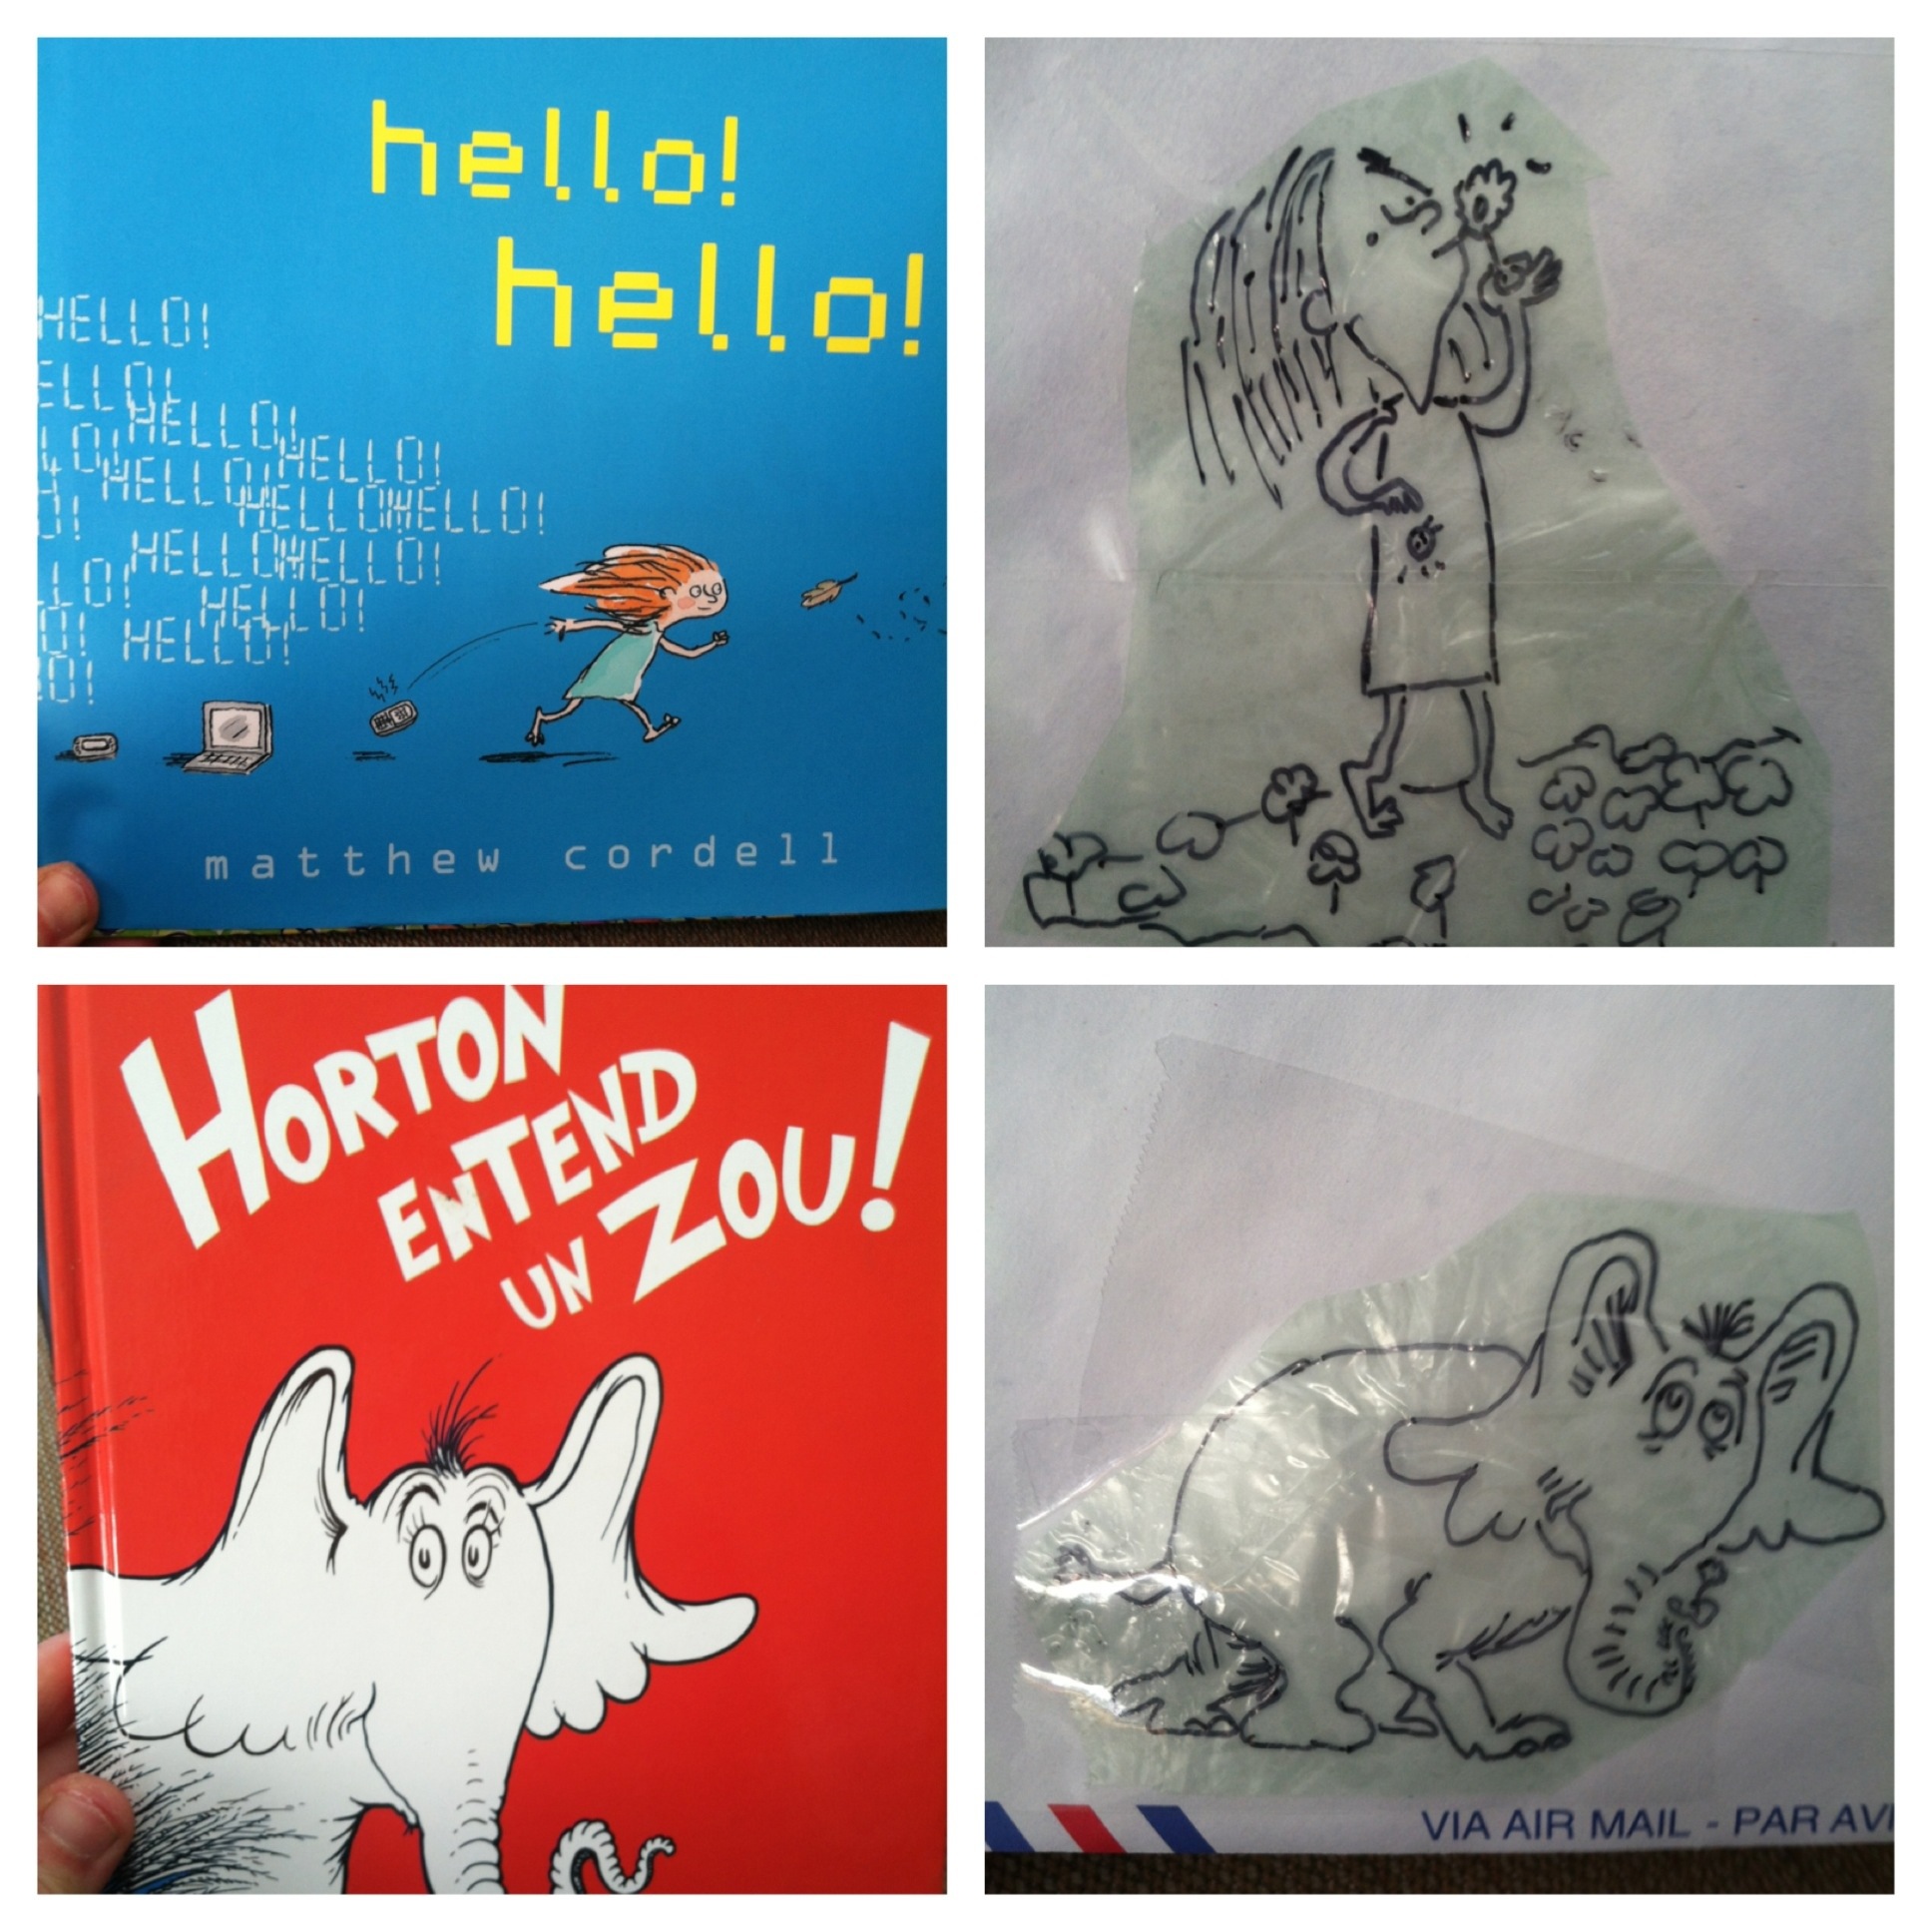 Hello, Hello by Matthew Cordell and the French edition of Horton Hears a Who make great mail art!